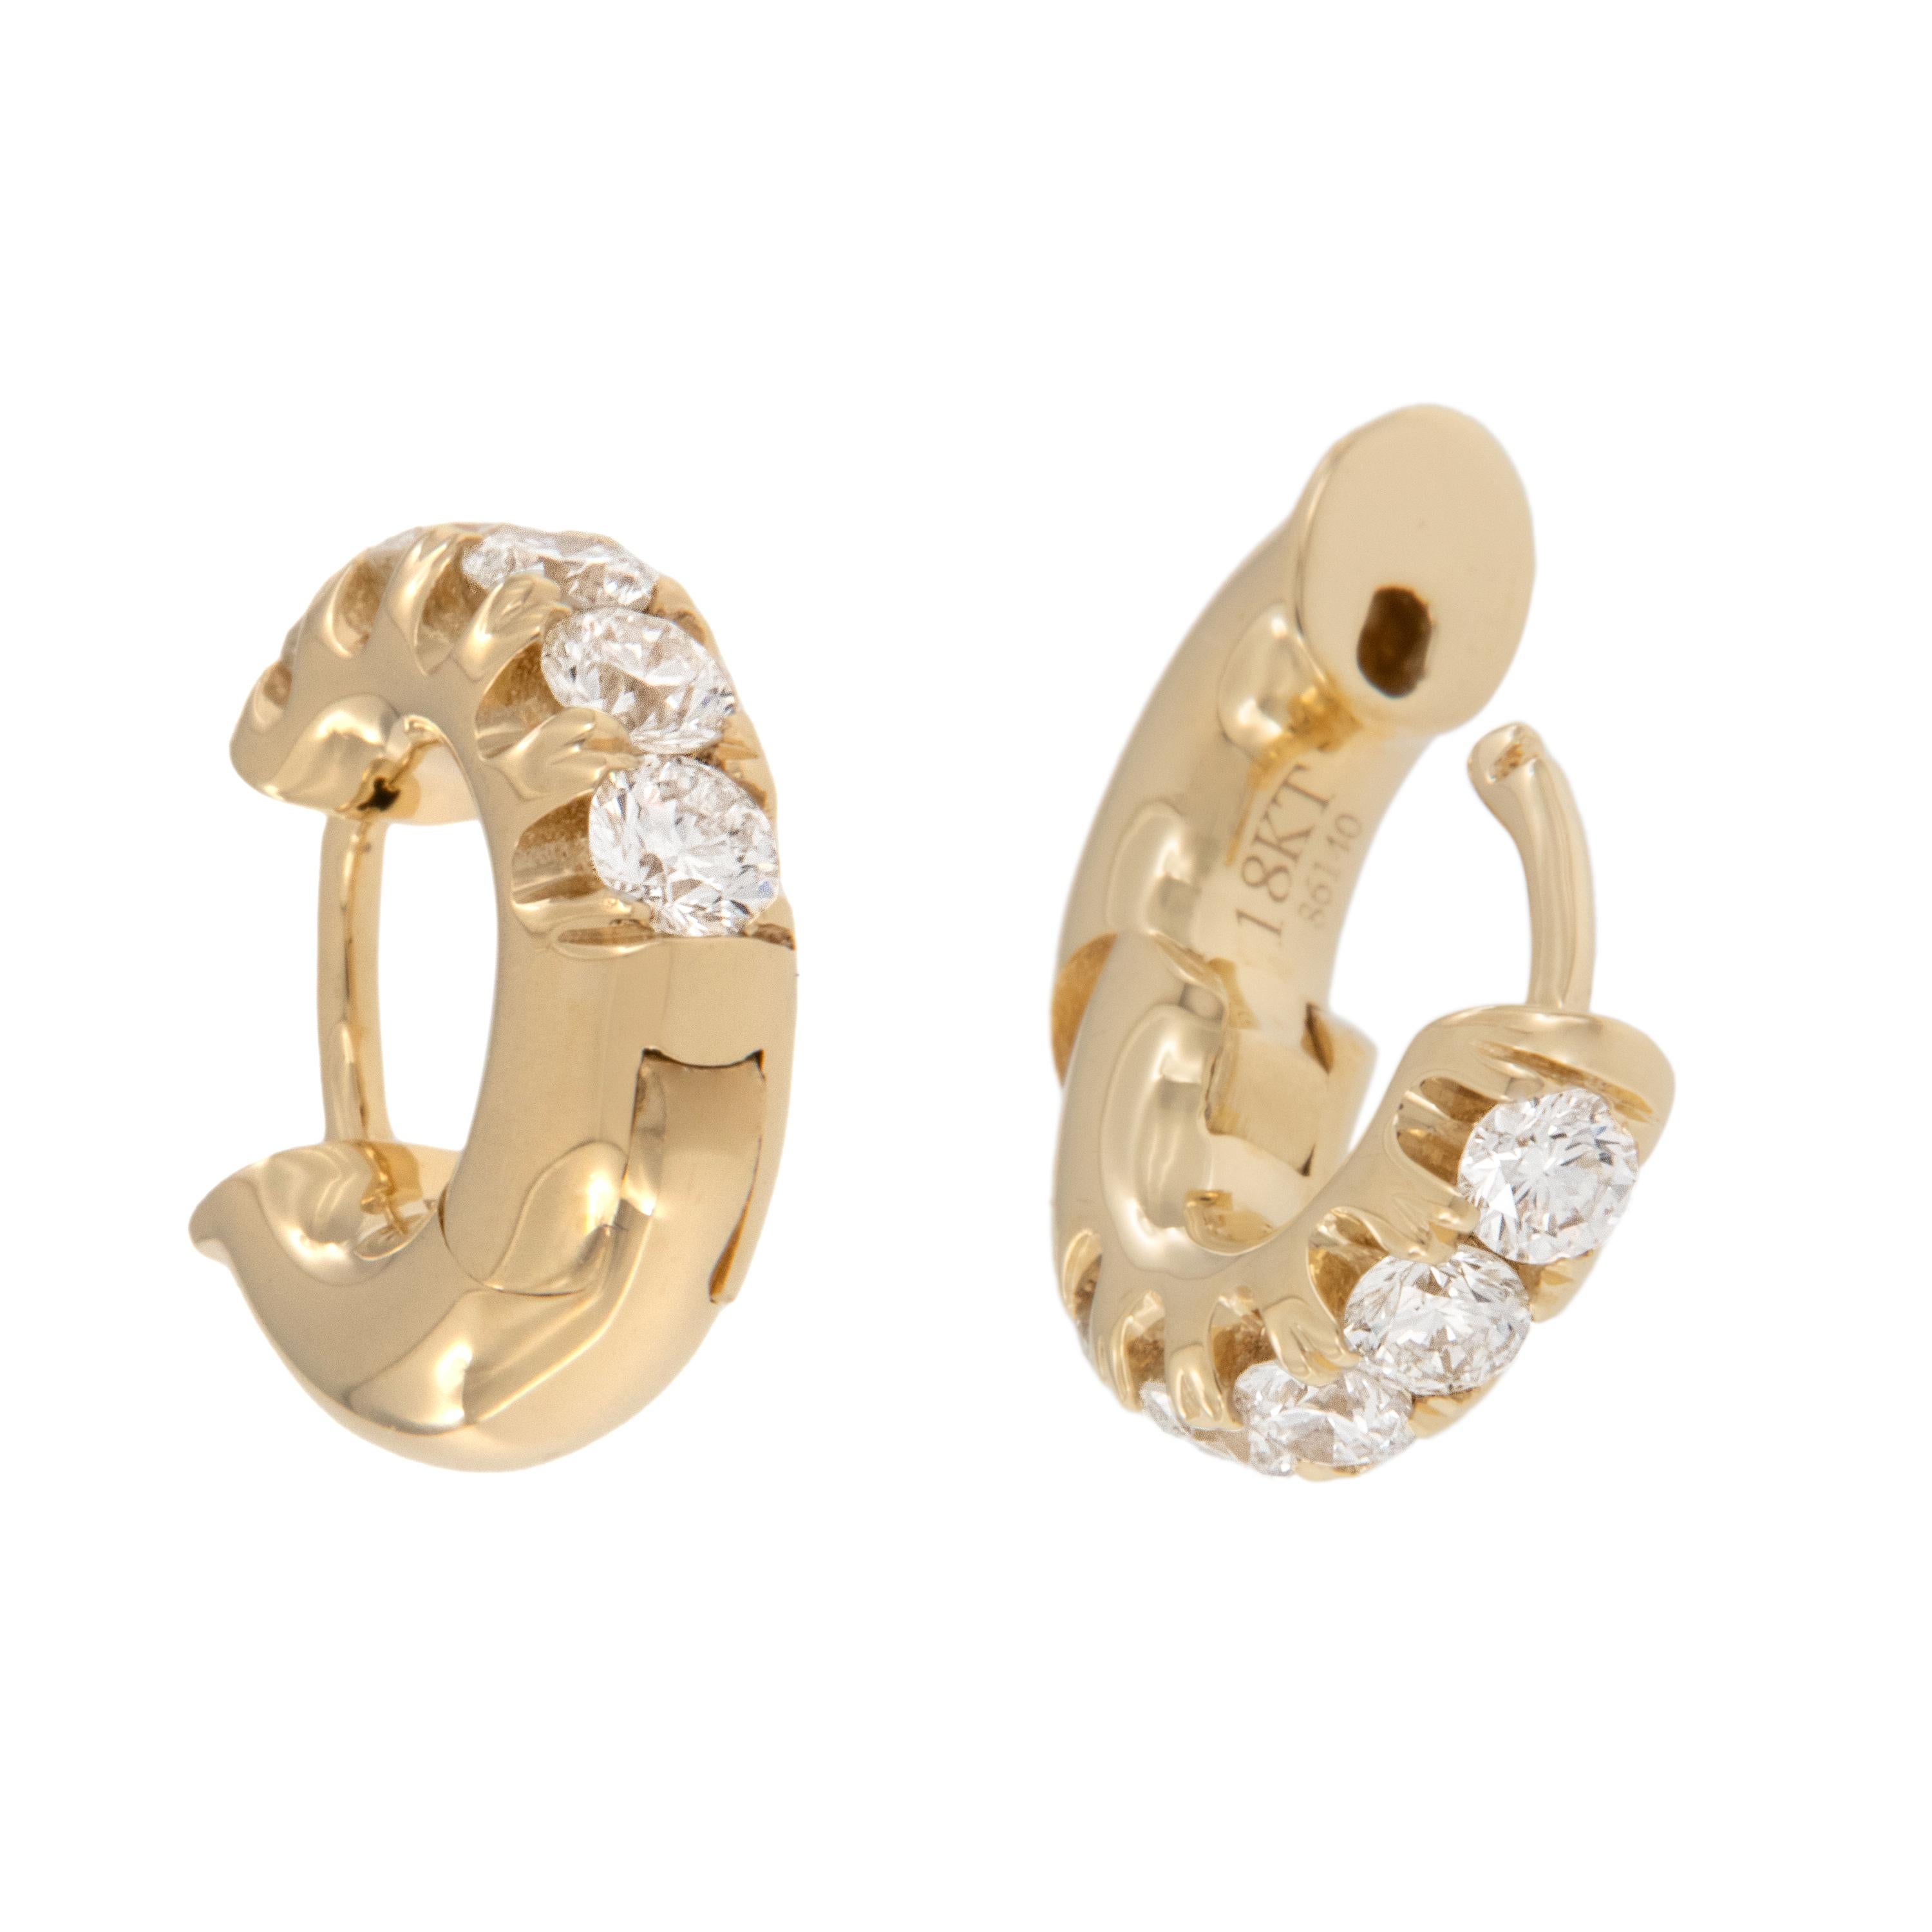 Beautiful split prong diamond earrings you can wear every day! Made from fine 18 karat yellow gold, these huggy earrings boast 0.50 Cttw. of VS clarity, G-H color diamonds. Being huggy style the hinged earring backs come up to click into the front